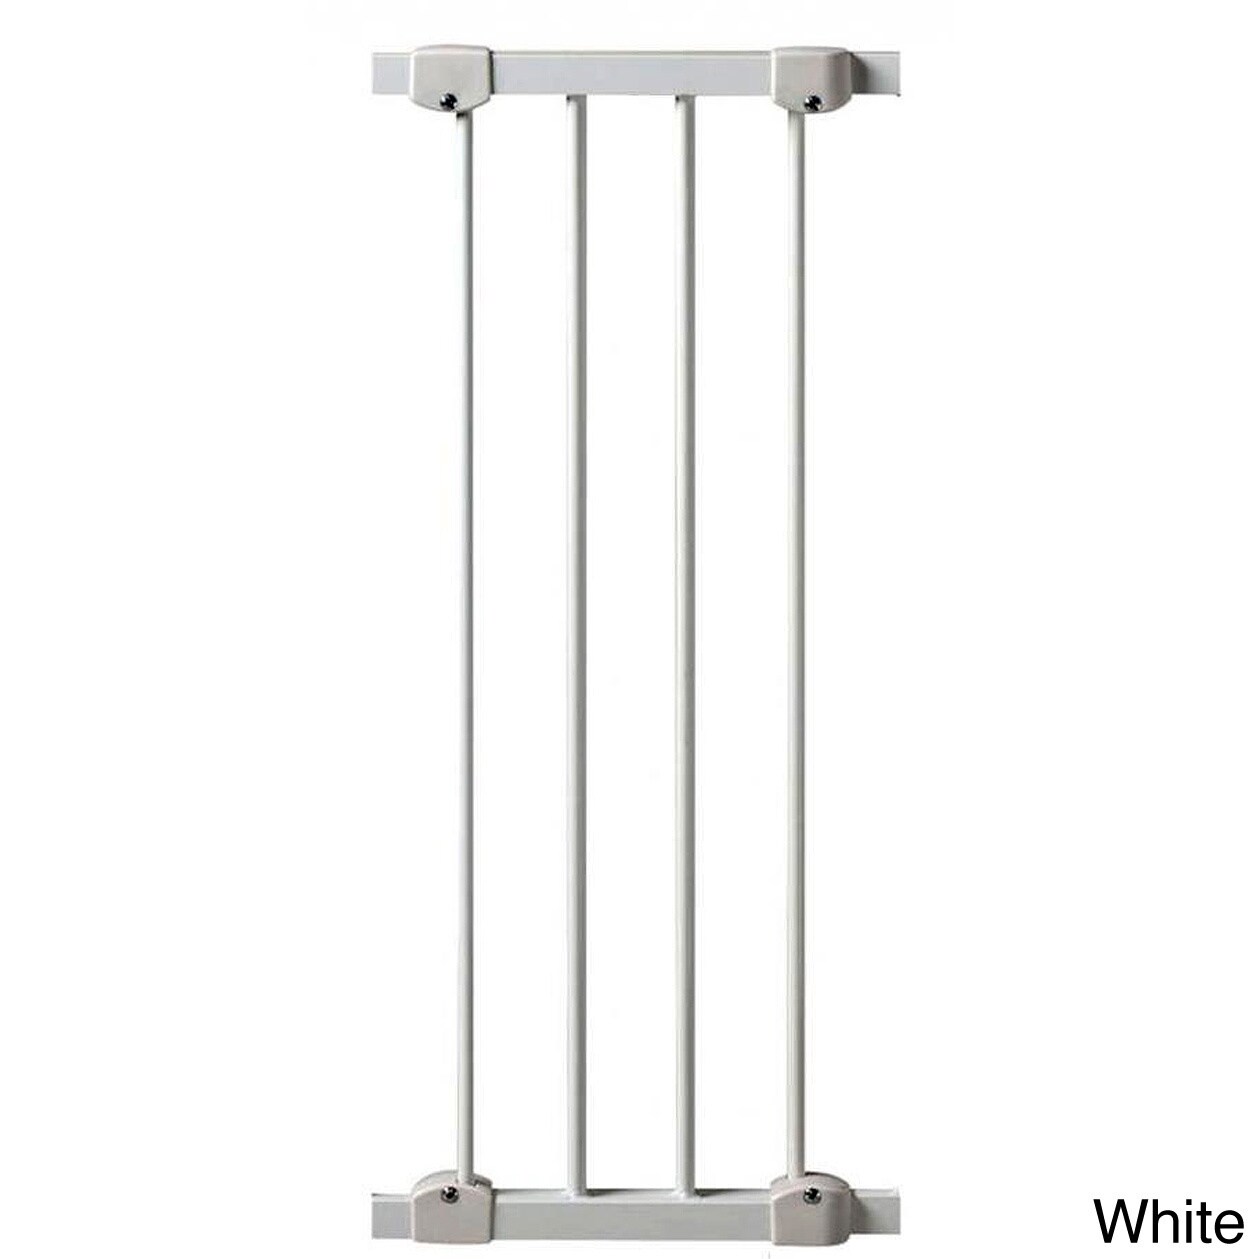 Kidco 10 inch Angle Mount Safeway Gate Extension Kit (10 inchesMaterials MetalDimensions 29 inches high x 1.2 inches wide x 10.5 inches longAssembly Required )